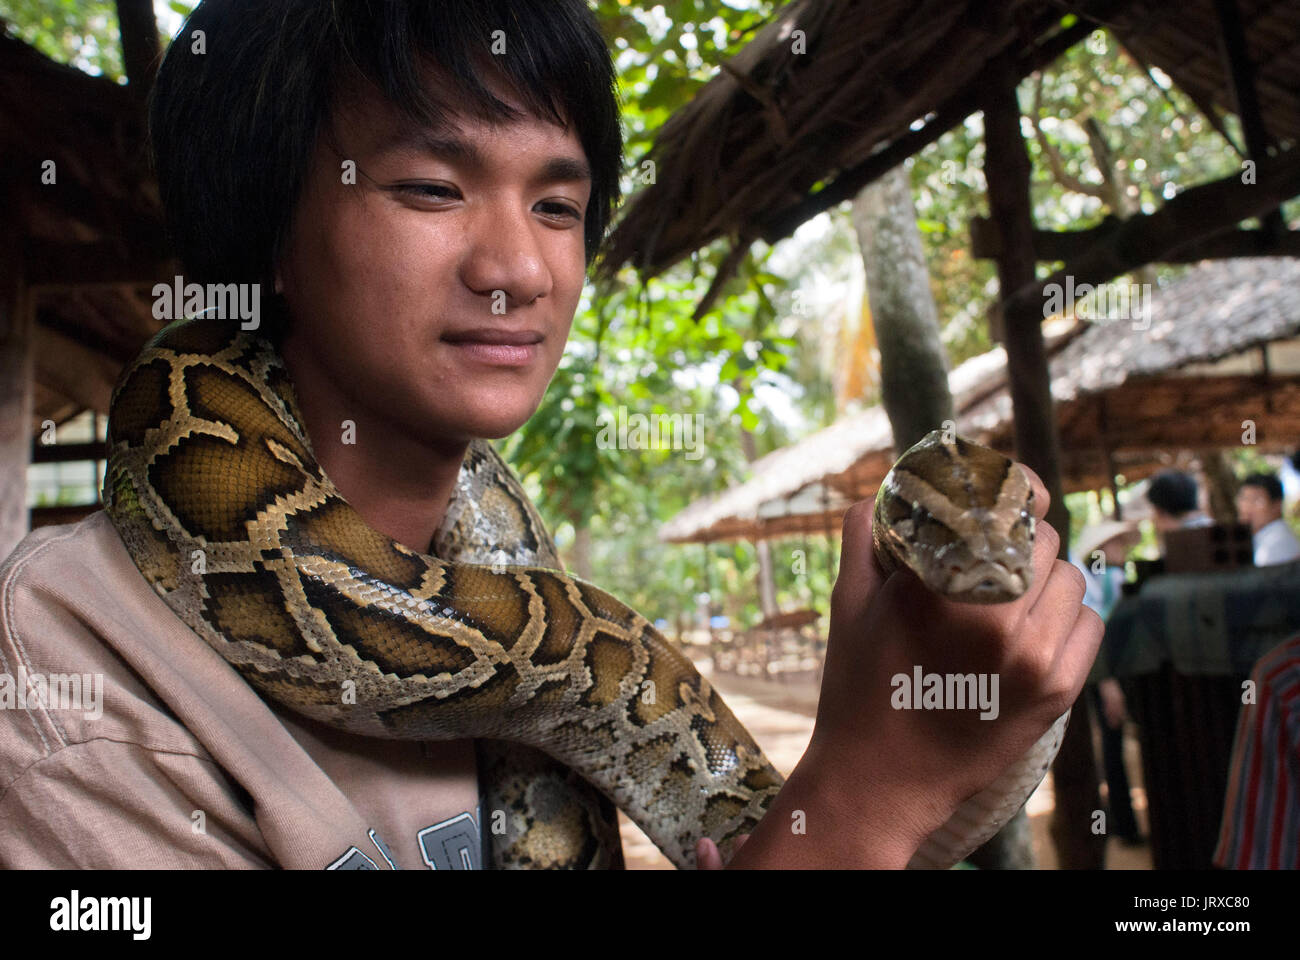 A tourist takes pictures with a boa snake in Turtle Island (Con Qui). Mekong Delta, Vietnam. Stock Photo